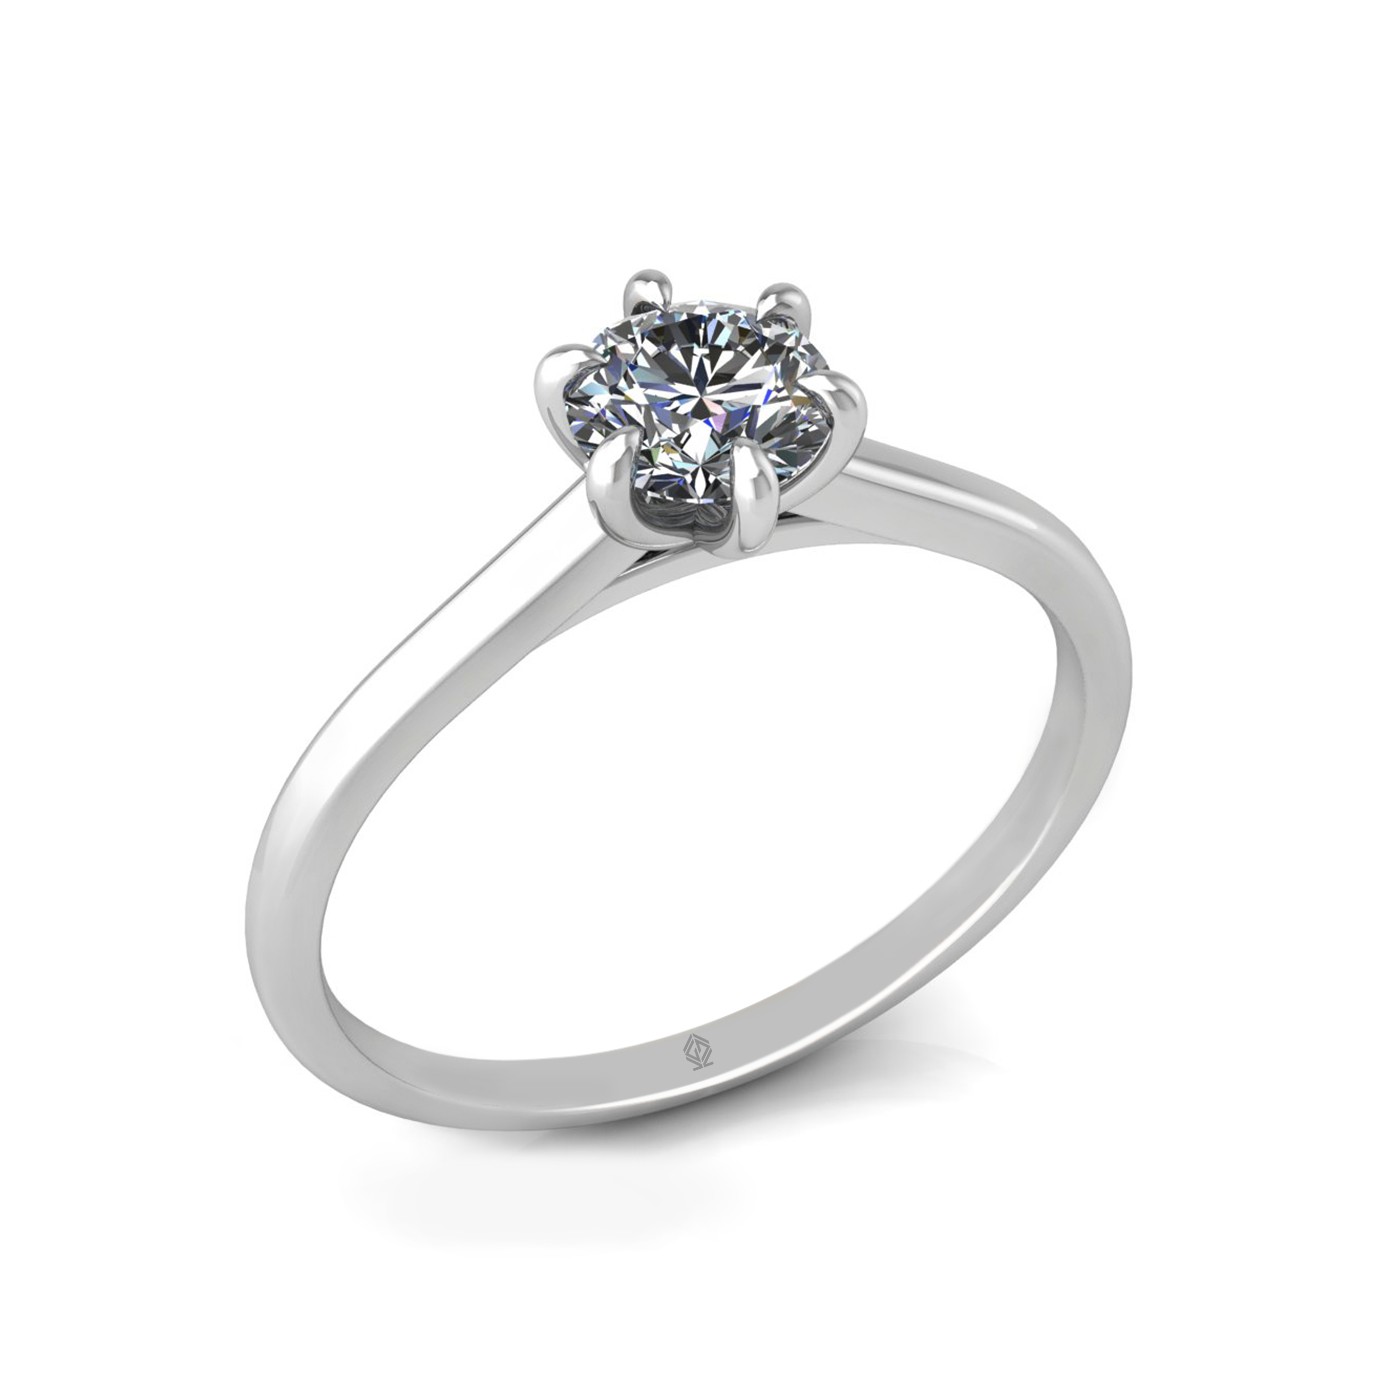 18k white gold 0,50 ct 6 prongs solitaire round cut diamond engagement ring with whisper thin band